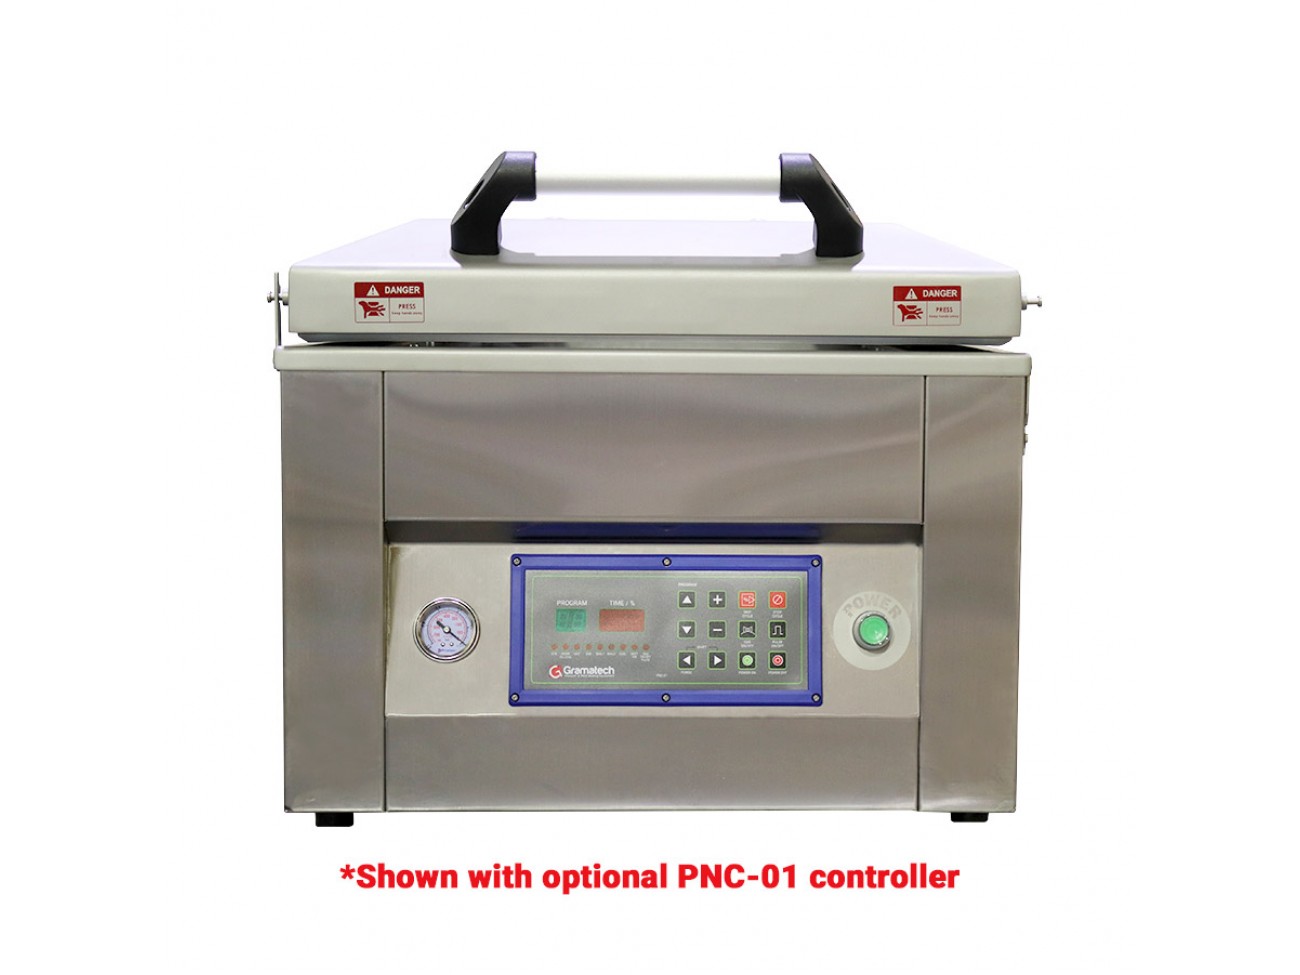 CHTC-520F: Stainless-Steel Chamber Vacuum Sealer